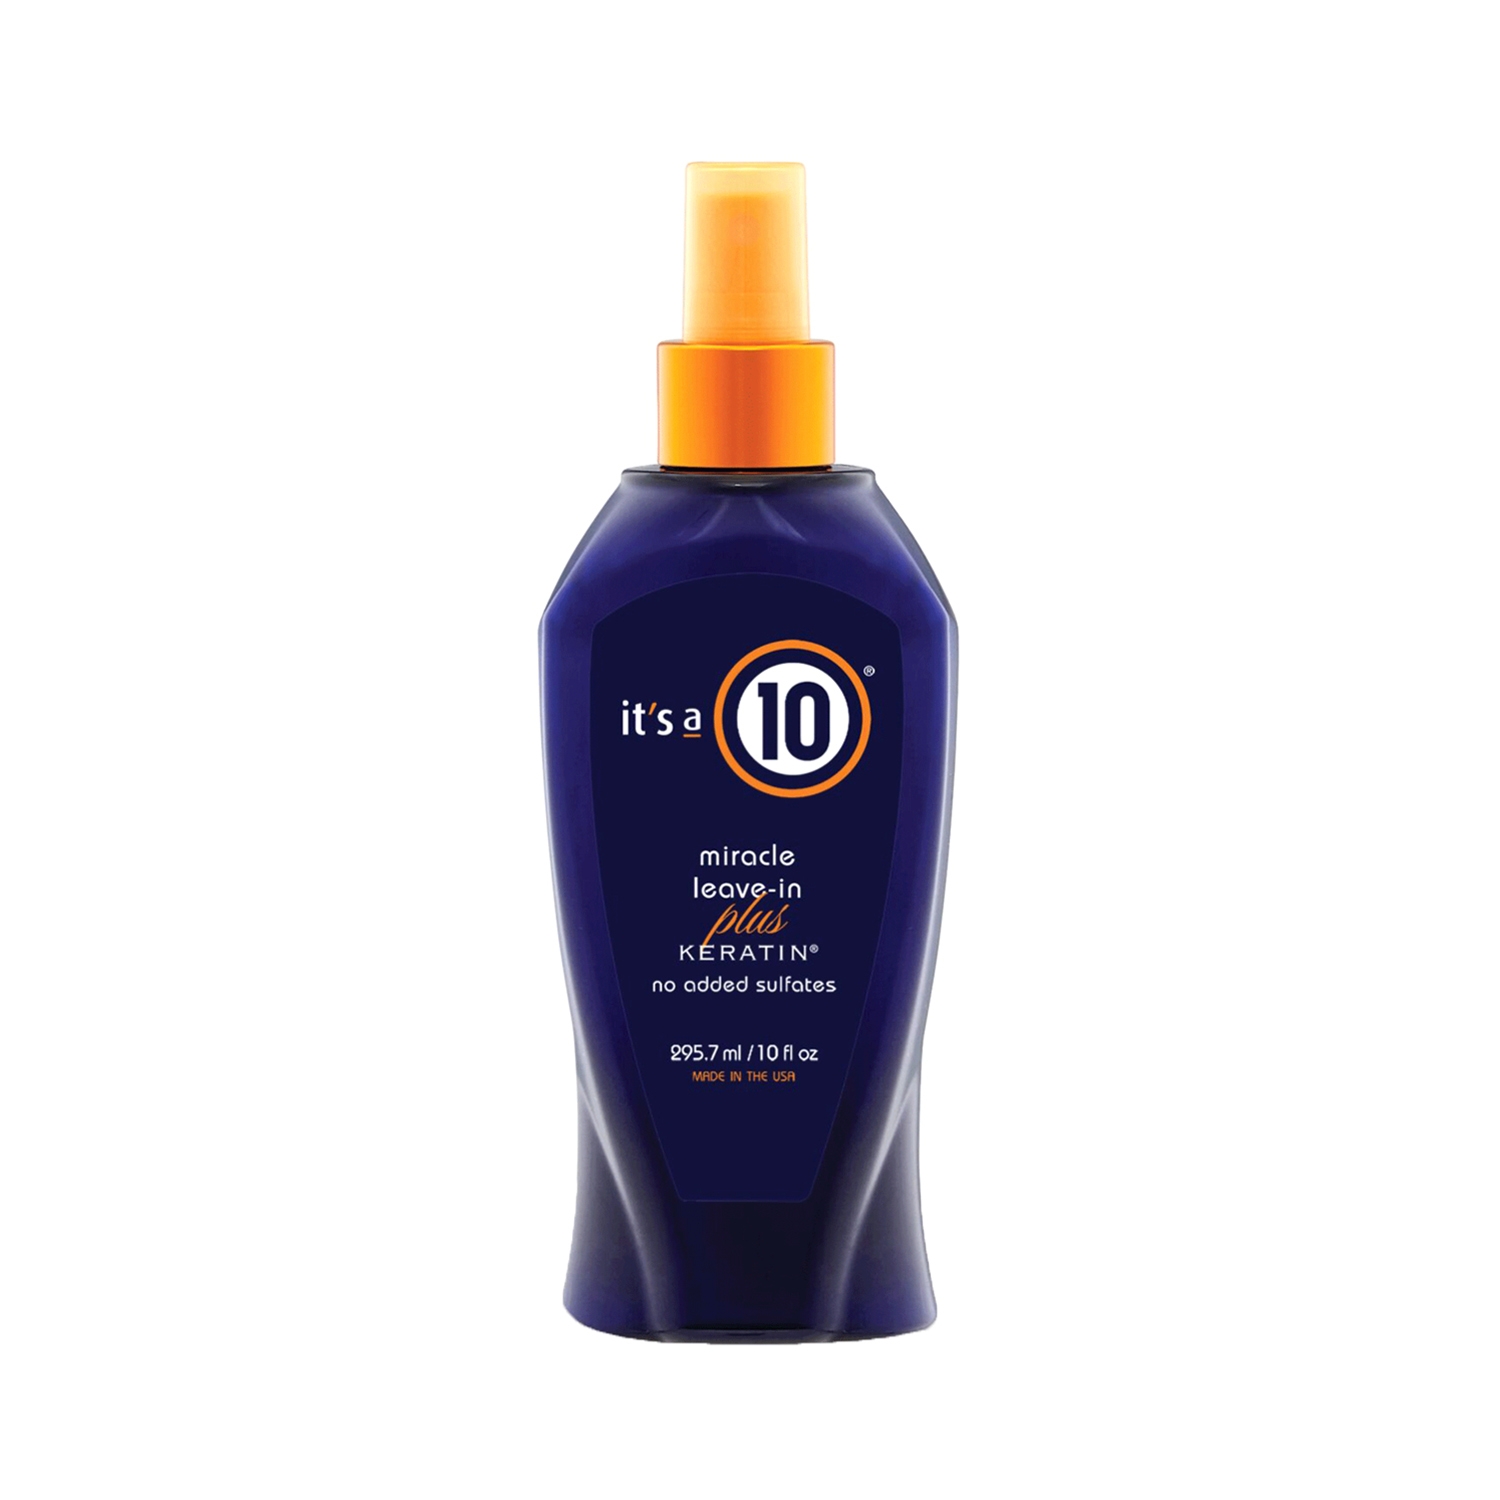 It's a 10 Haircare Miracle Leave In Plus Keratin (295.75ml)